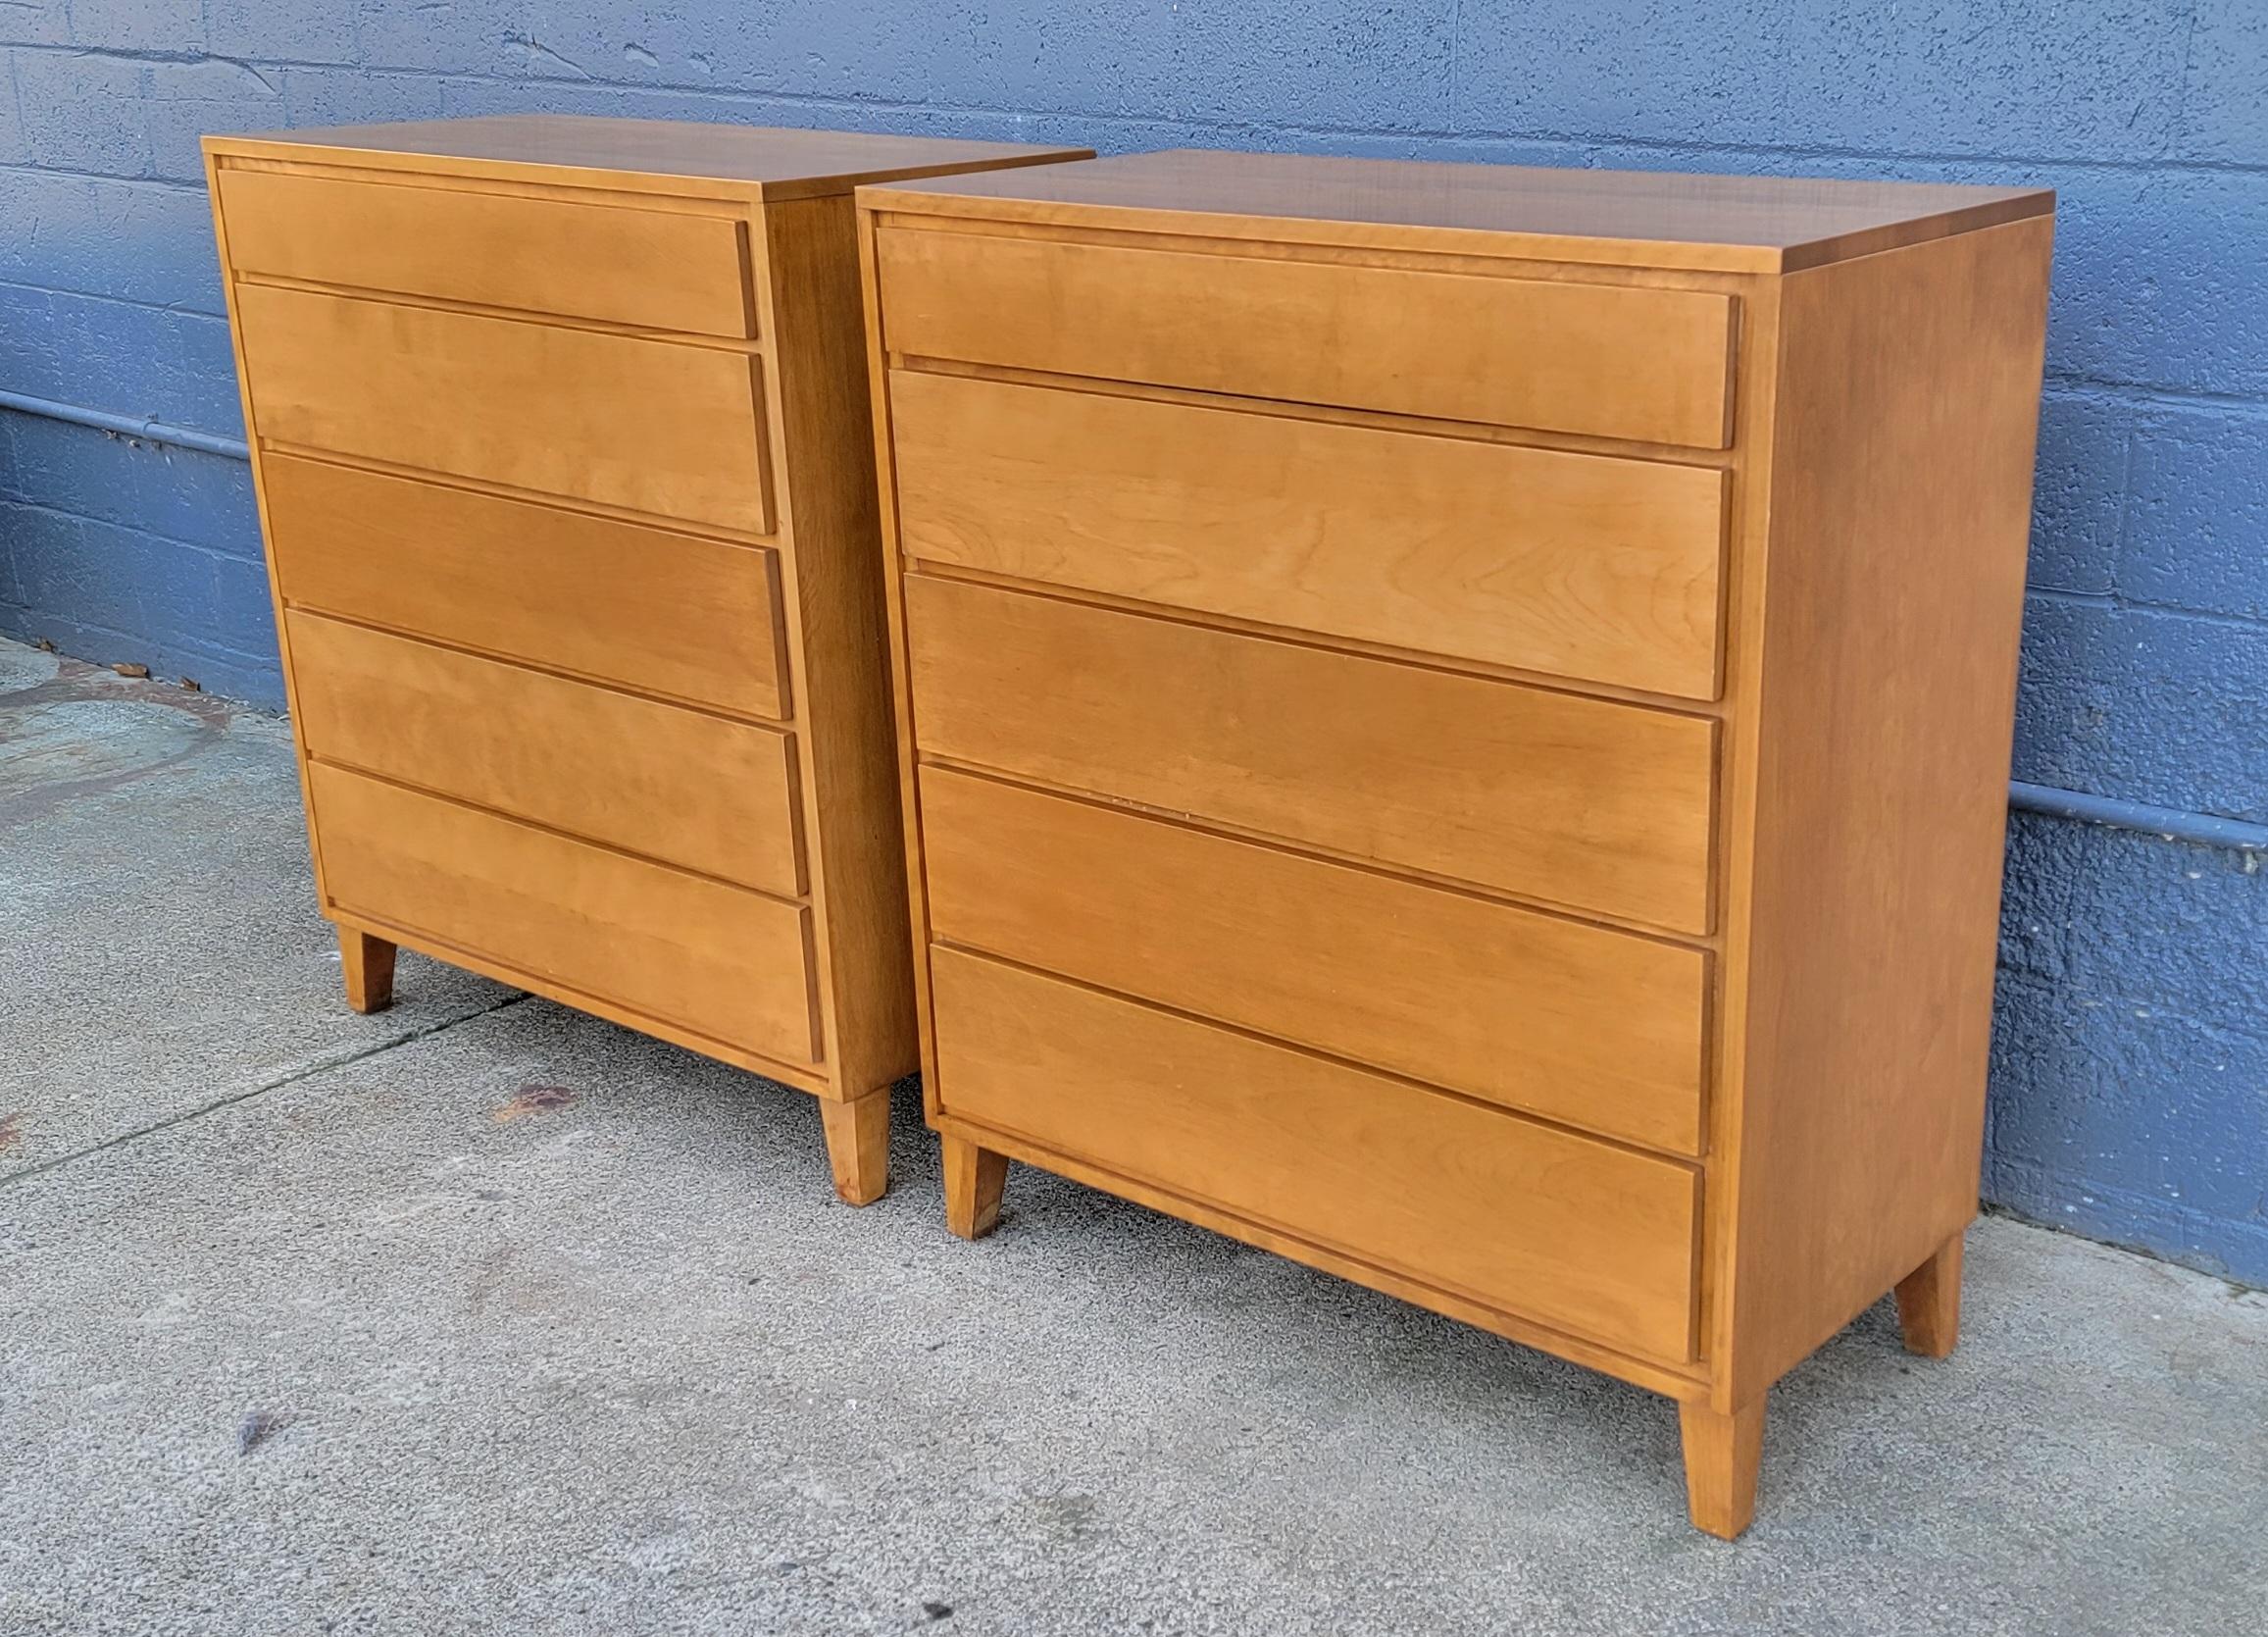 A pair of Mid-Century Modern tall dressers designed by Leslie Diamond for Conant Ball. Circa. 1950. Fine quality crafted in solid maple. Ample storage with 10 drawers. Beautiful wood to interior to drawers that glide easily. Both dressers retail